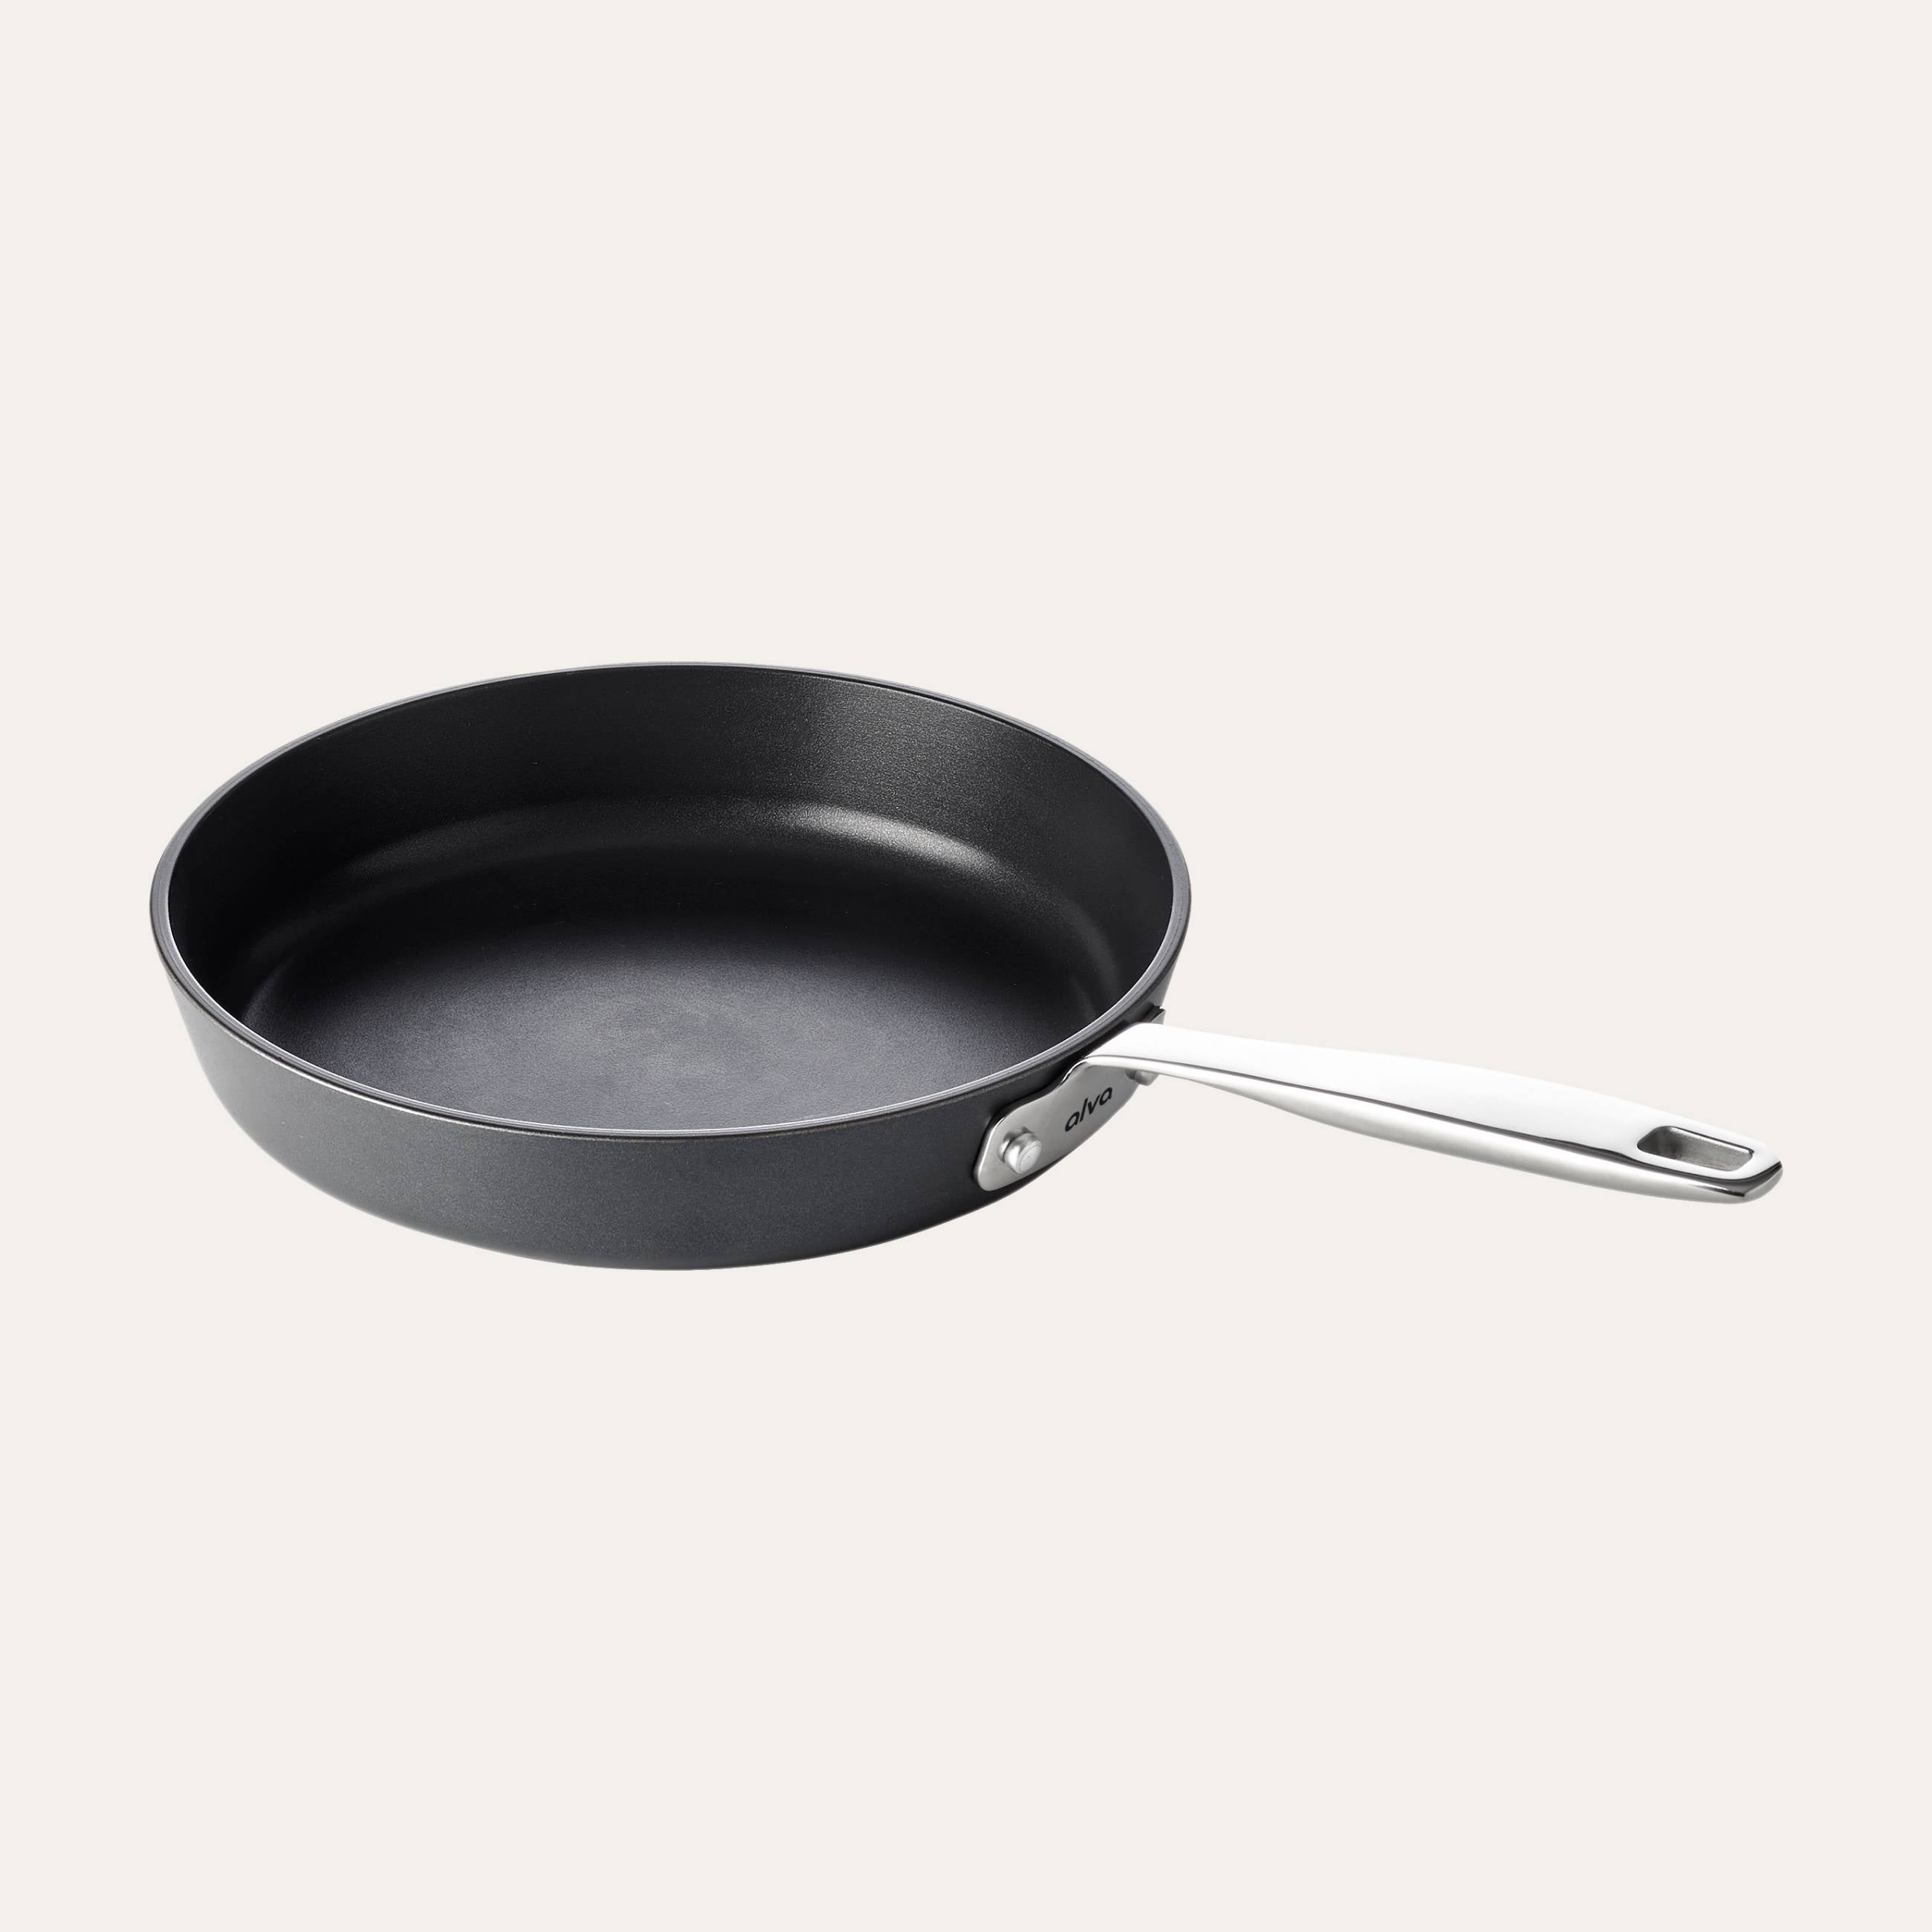 HLAFRG Nonstick Pan 12 inch Frying Pan with Lid, Skillet Nonstick with Lid, Black Marble Aluminium Cookware, Non Toxic APEO & PFOA Free,with